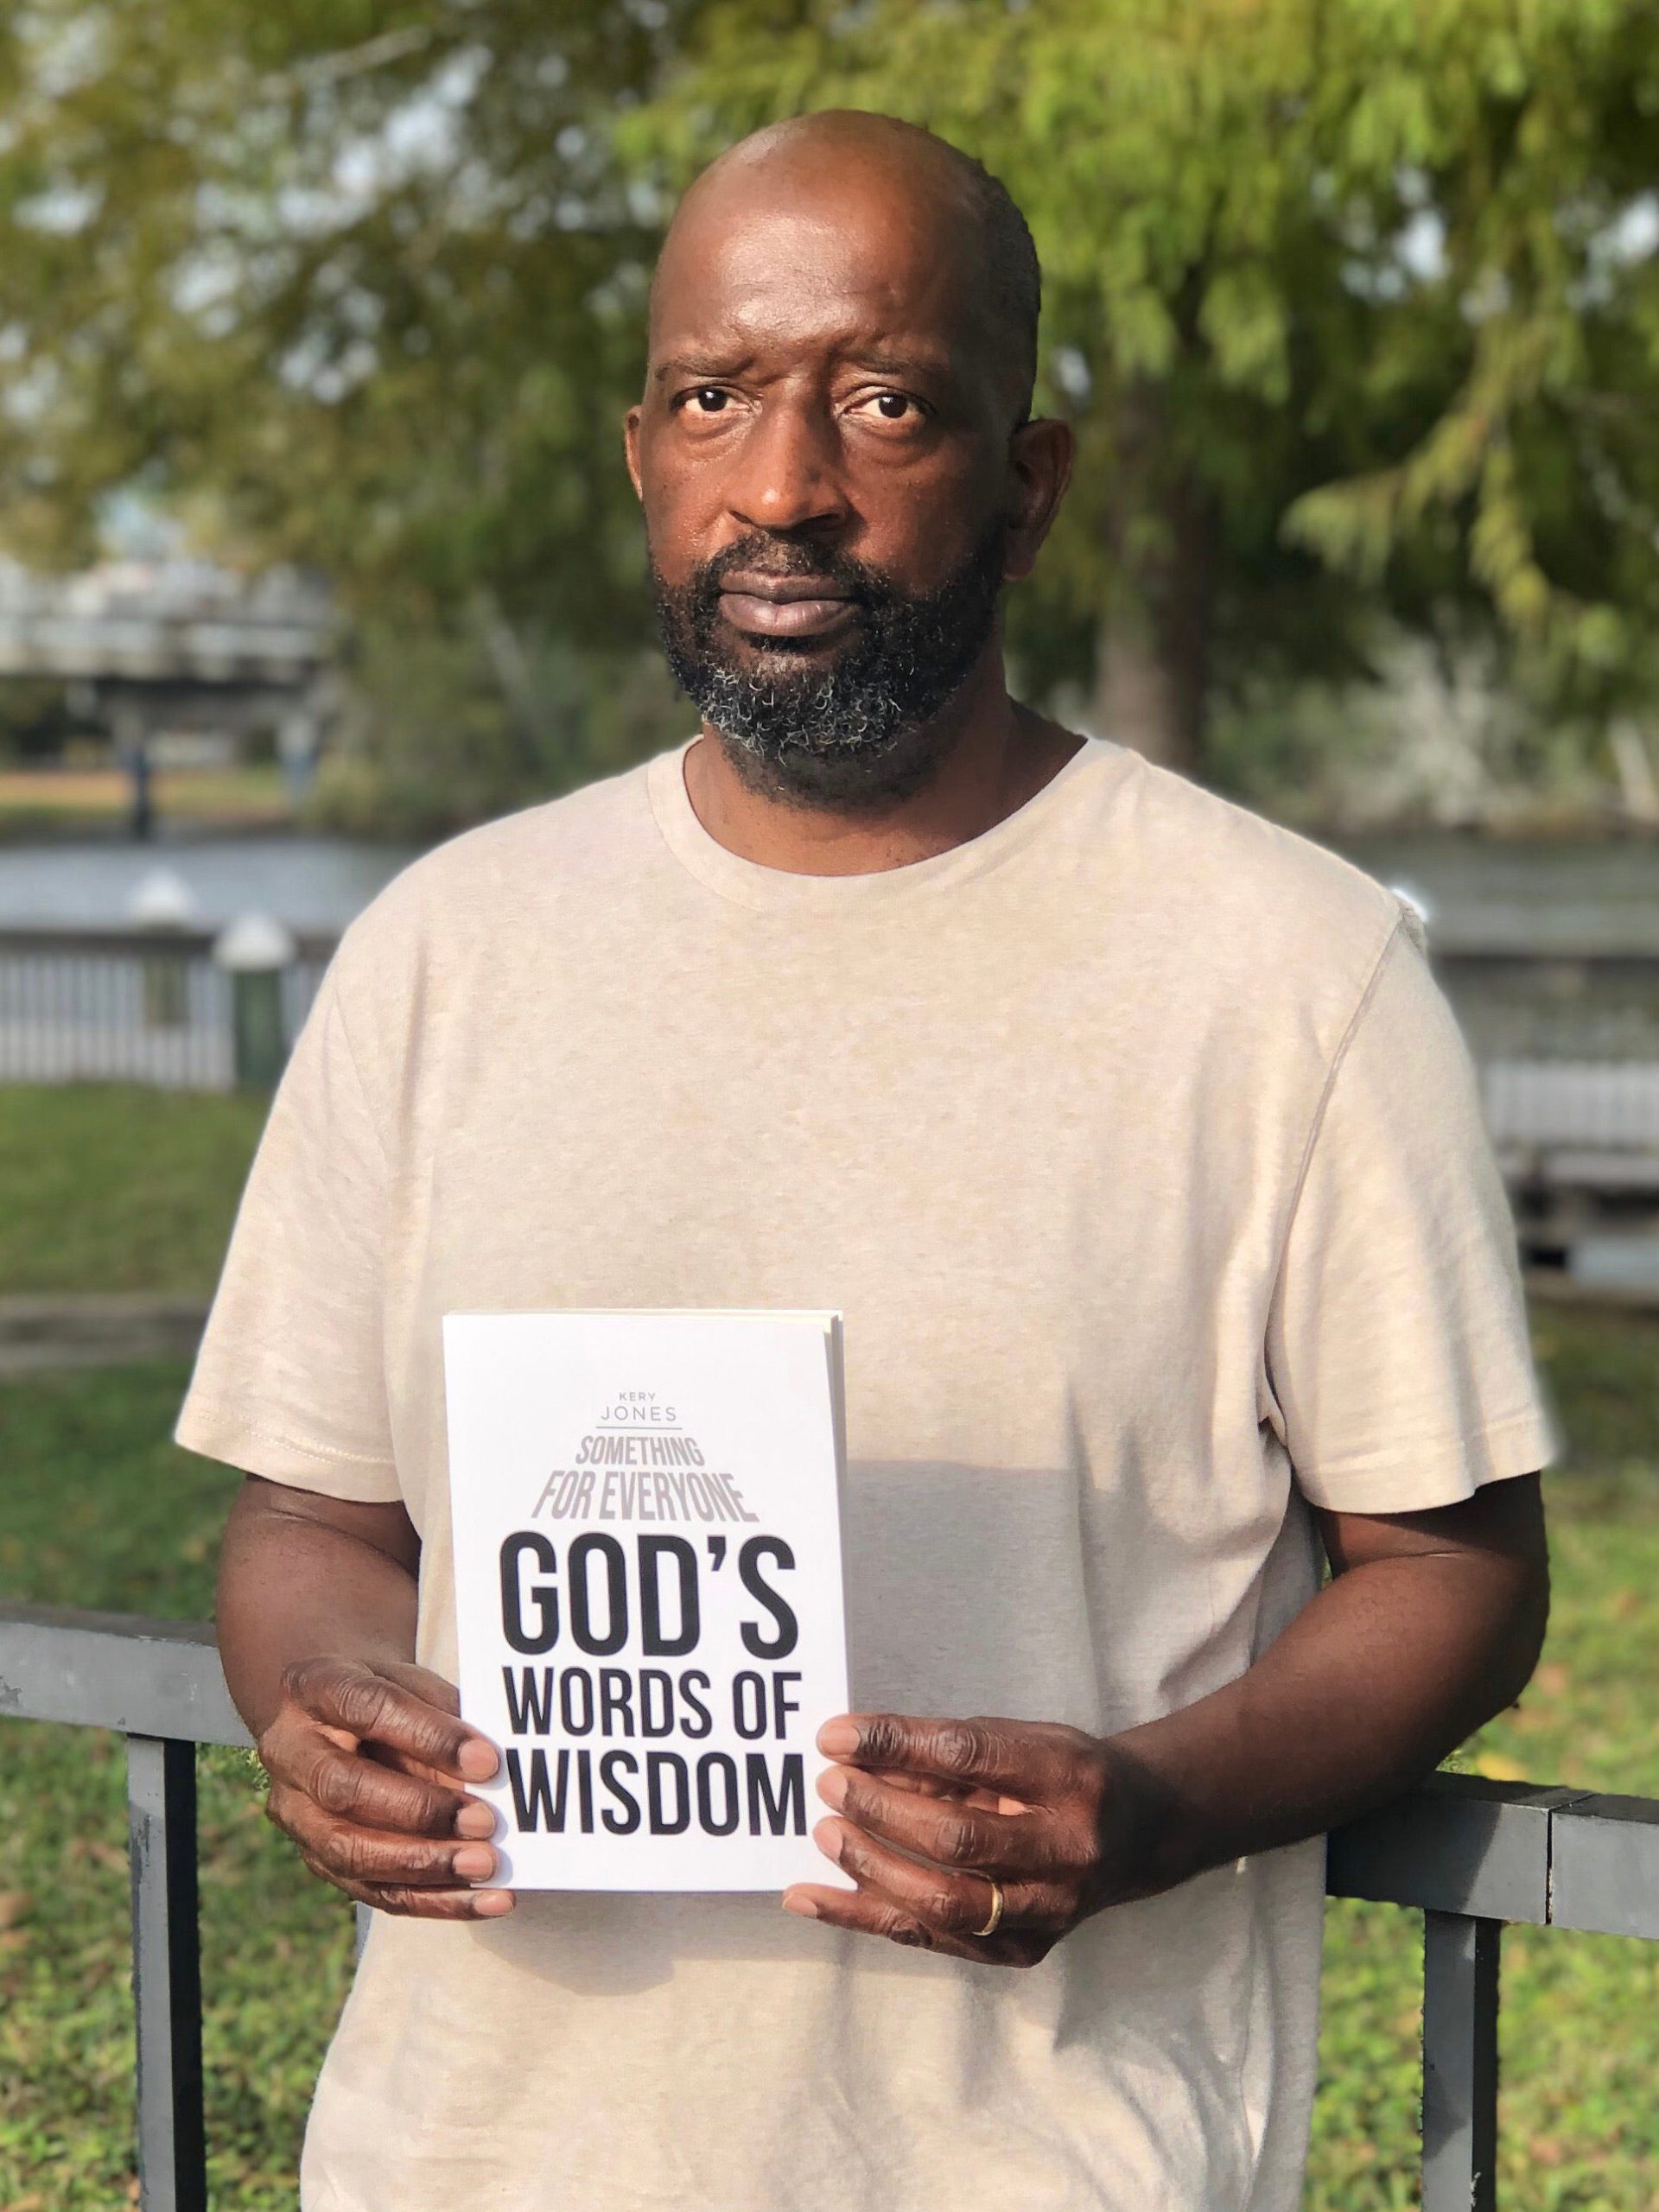 Milton author Kery Jones recently released his newest book, a collection of poetry titled “Something for Everyone: God’s Words of Wisdom.”